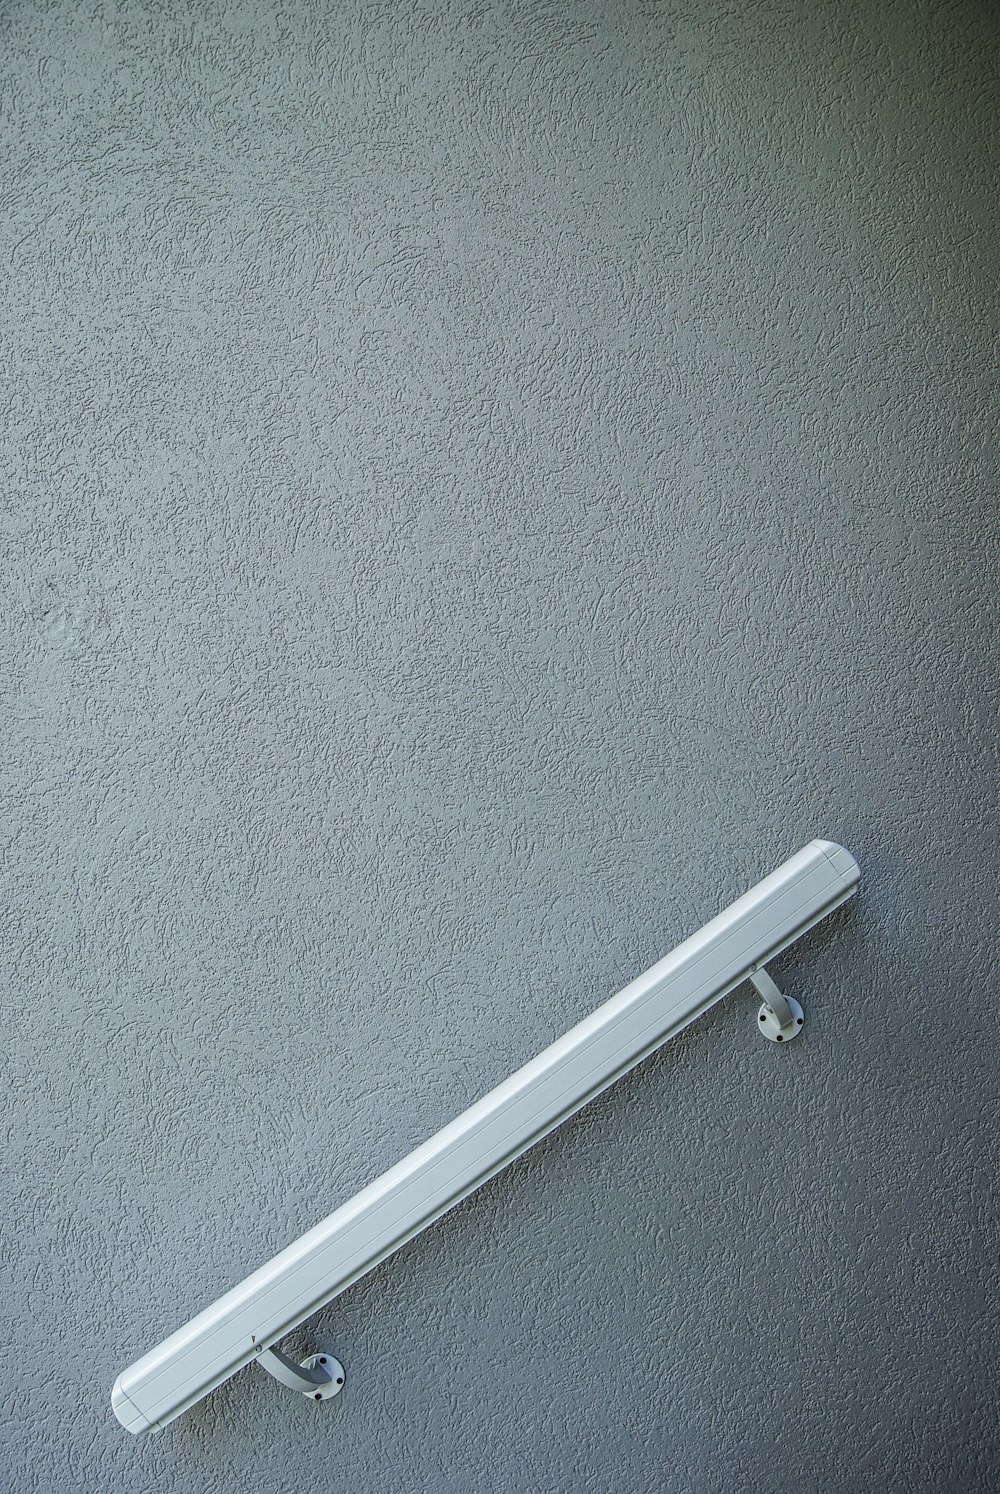 white metal pipe mounted on blue wall